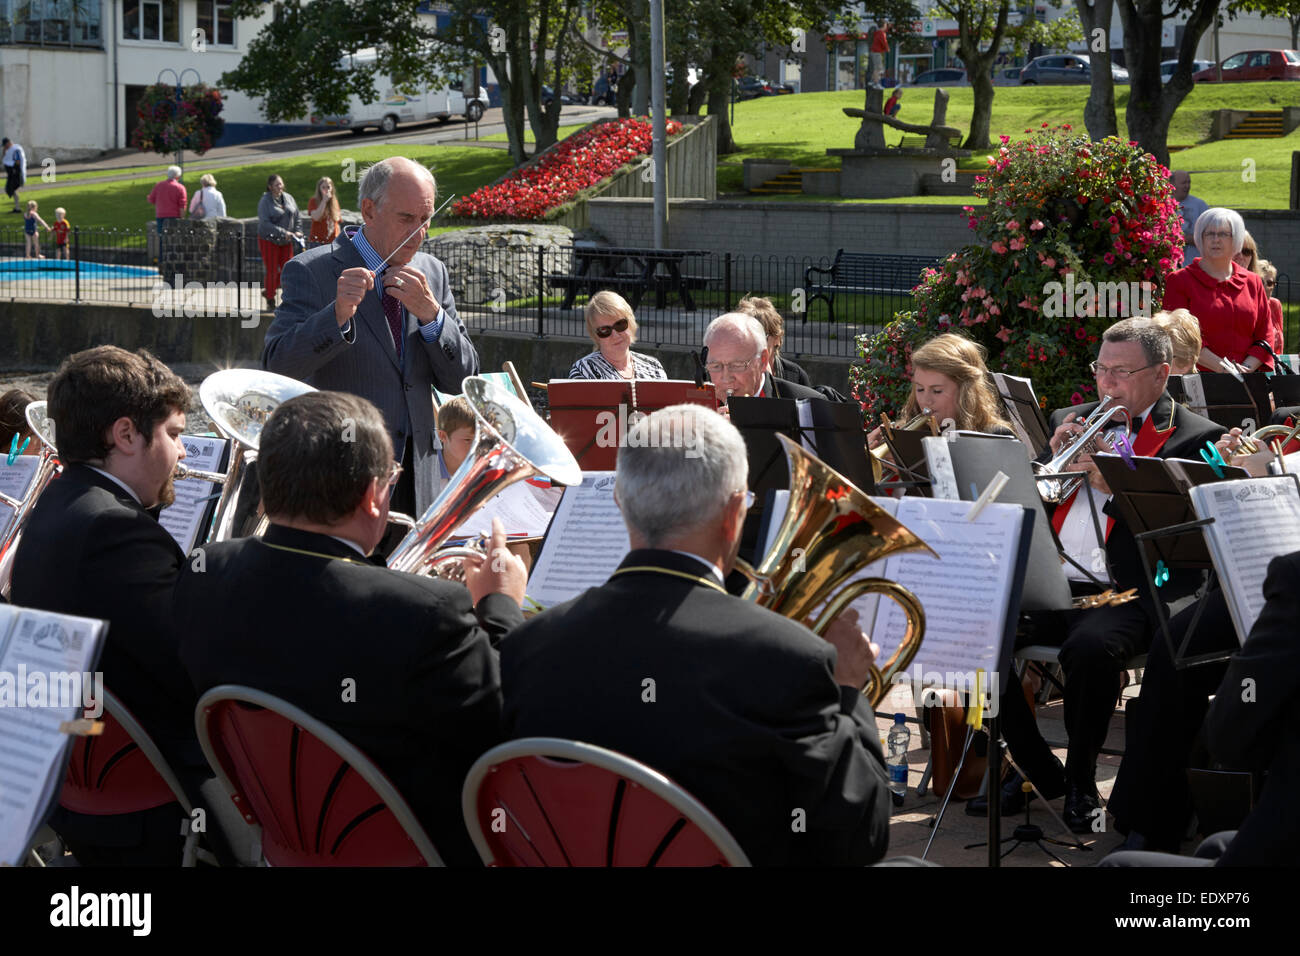 brass band playing outdoors at a summer event in the uk Stock Photo